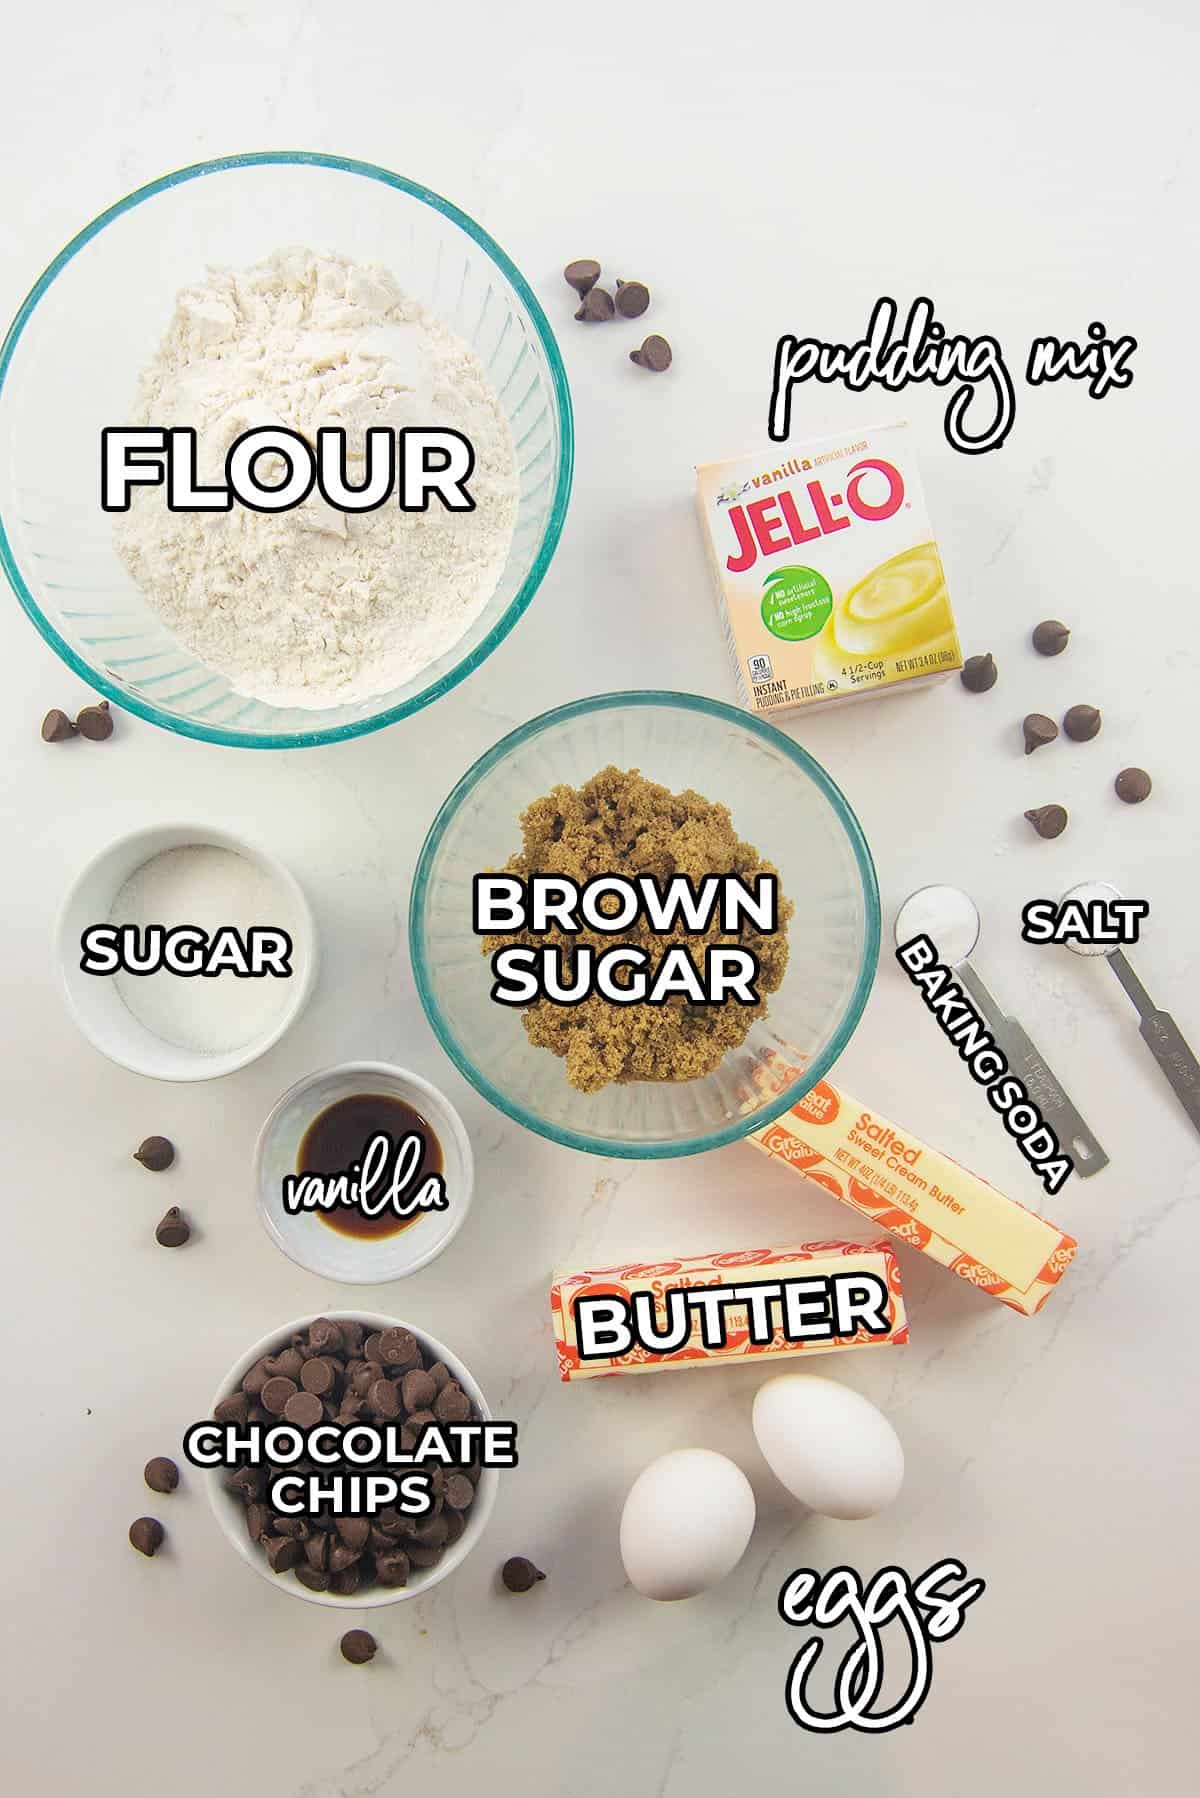 ingredients for pudding cookies.